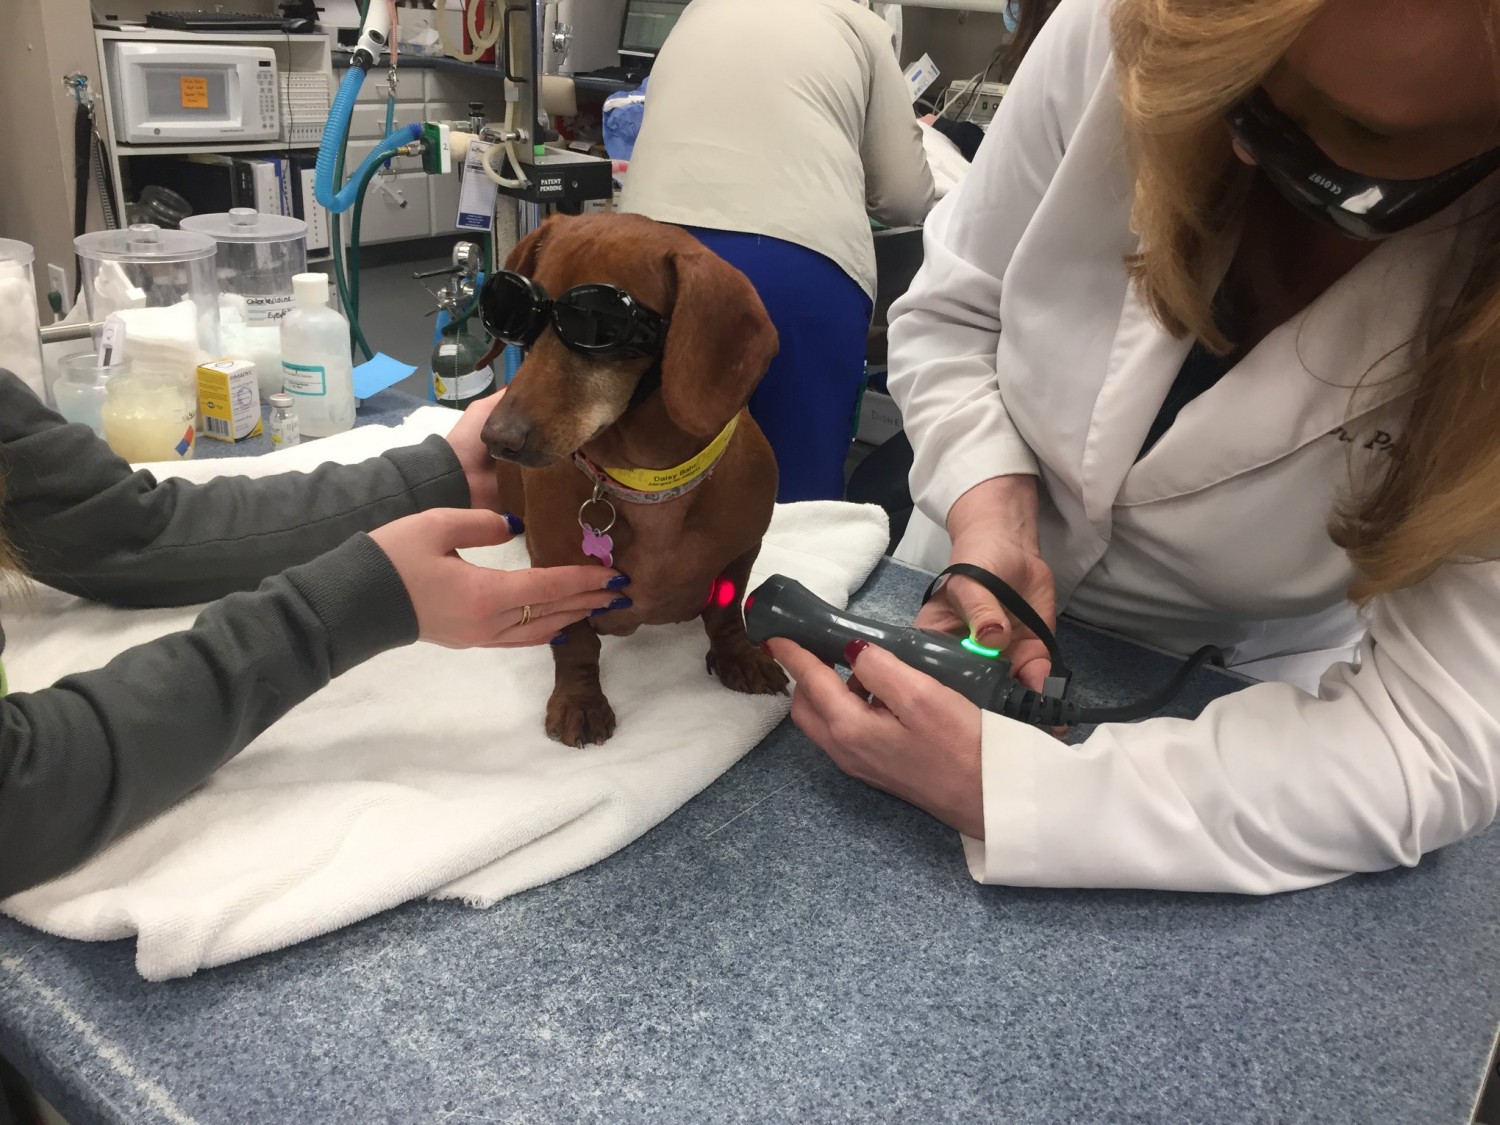 Daisy undergoing laser therapy